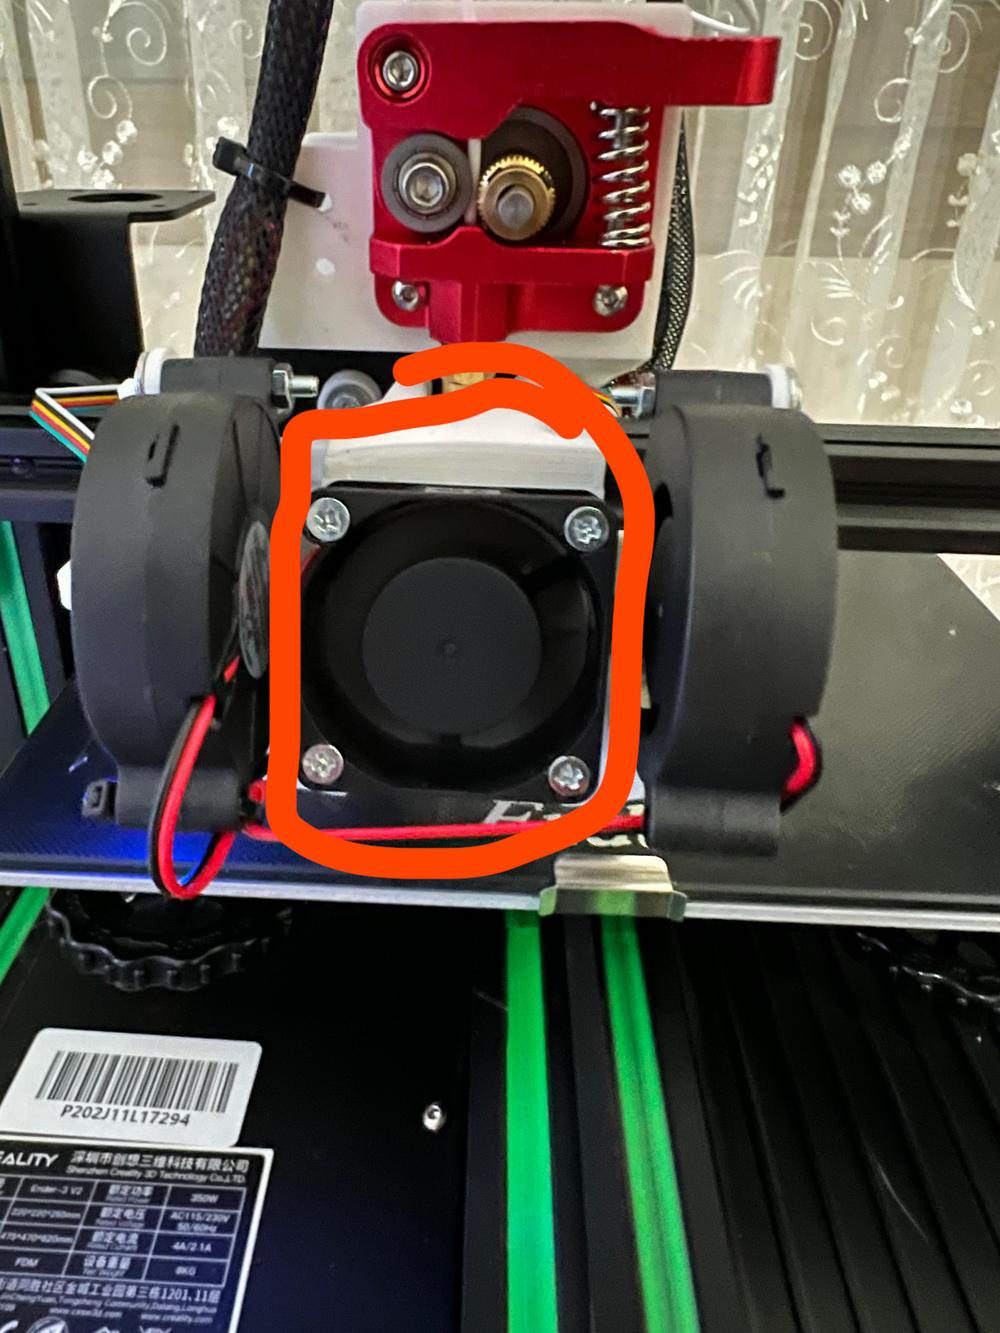 The image shows a close-up of a black fan on a 3D printer.